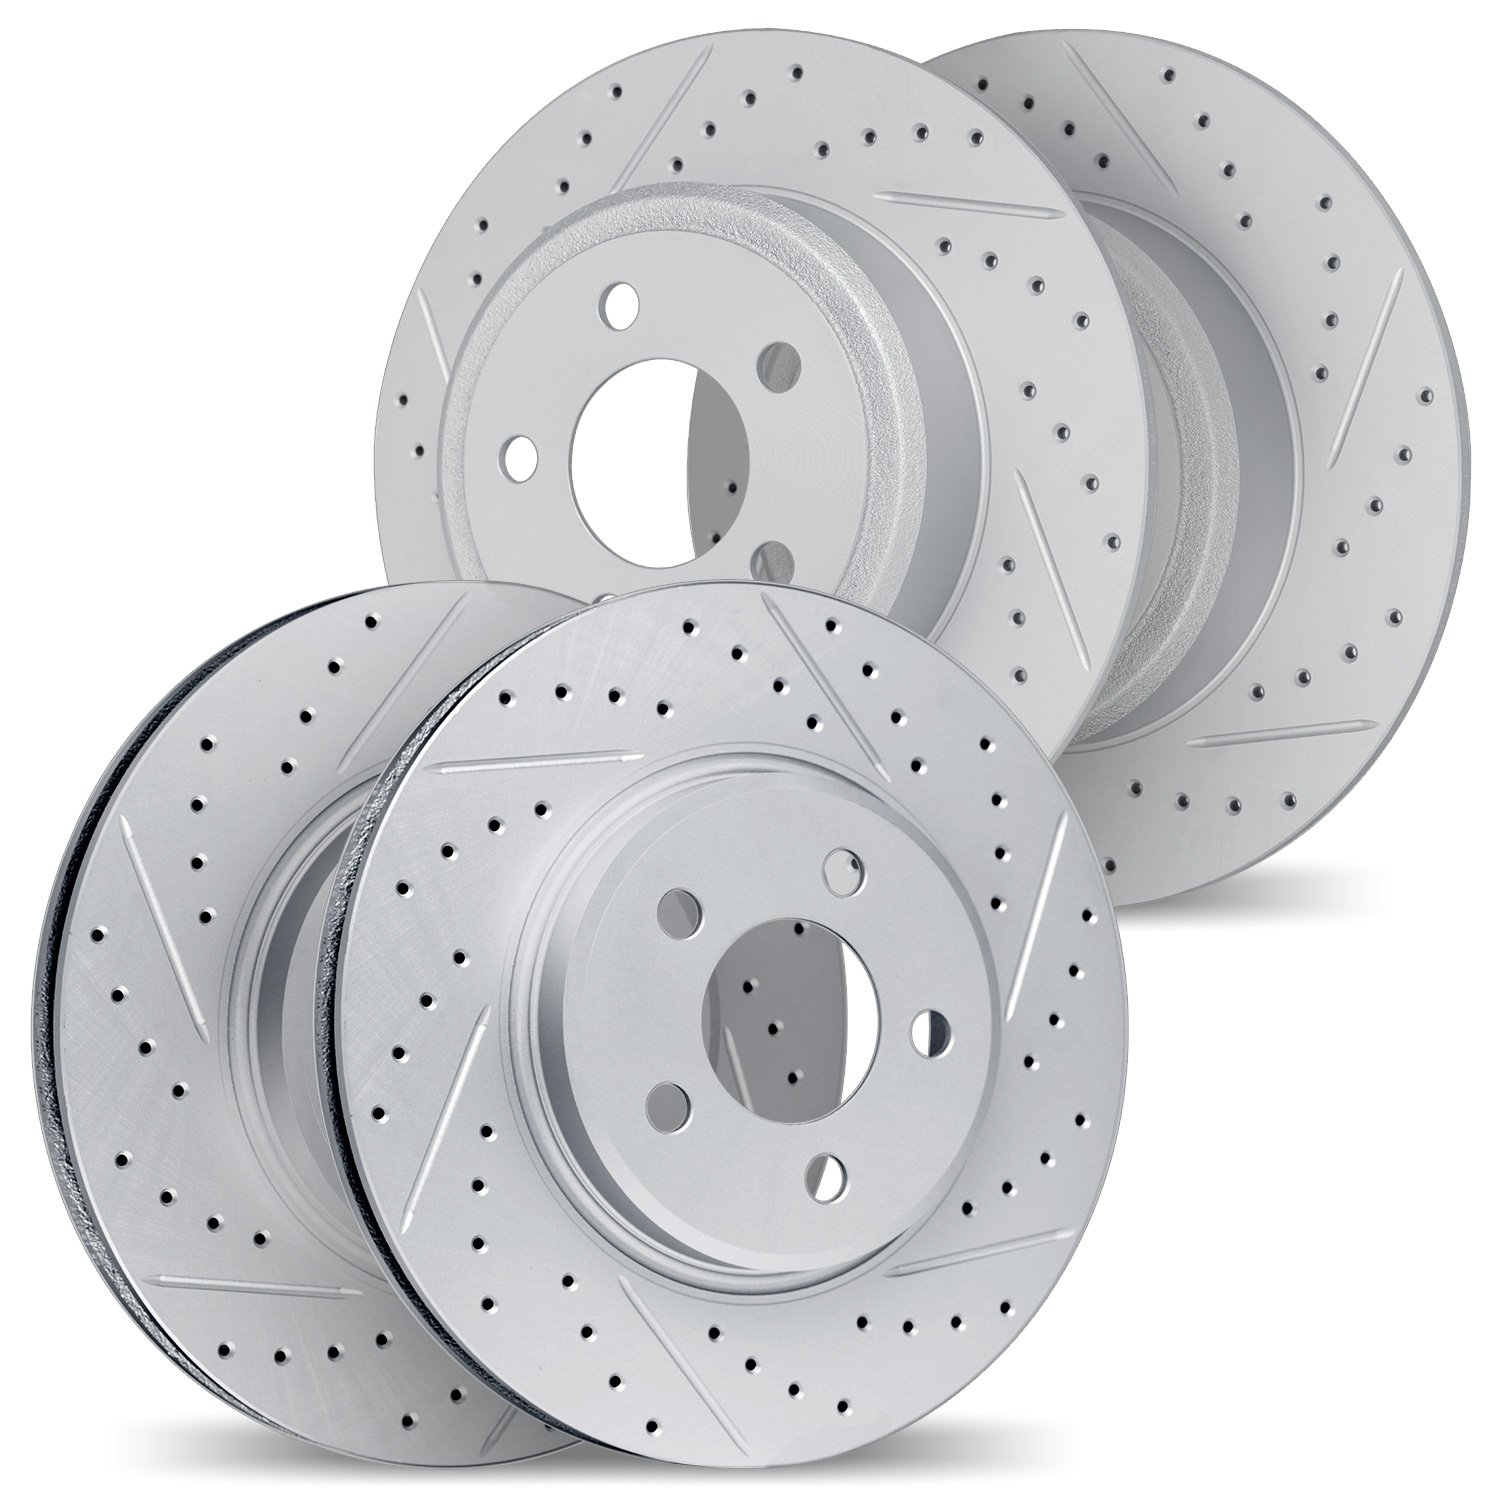 2004-03048 Geoperformance Drilled/Slotted Brake Rotors, 2003-2008 Kia/Hyundai/Genesis, Position: Front and Rear